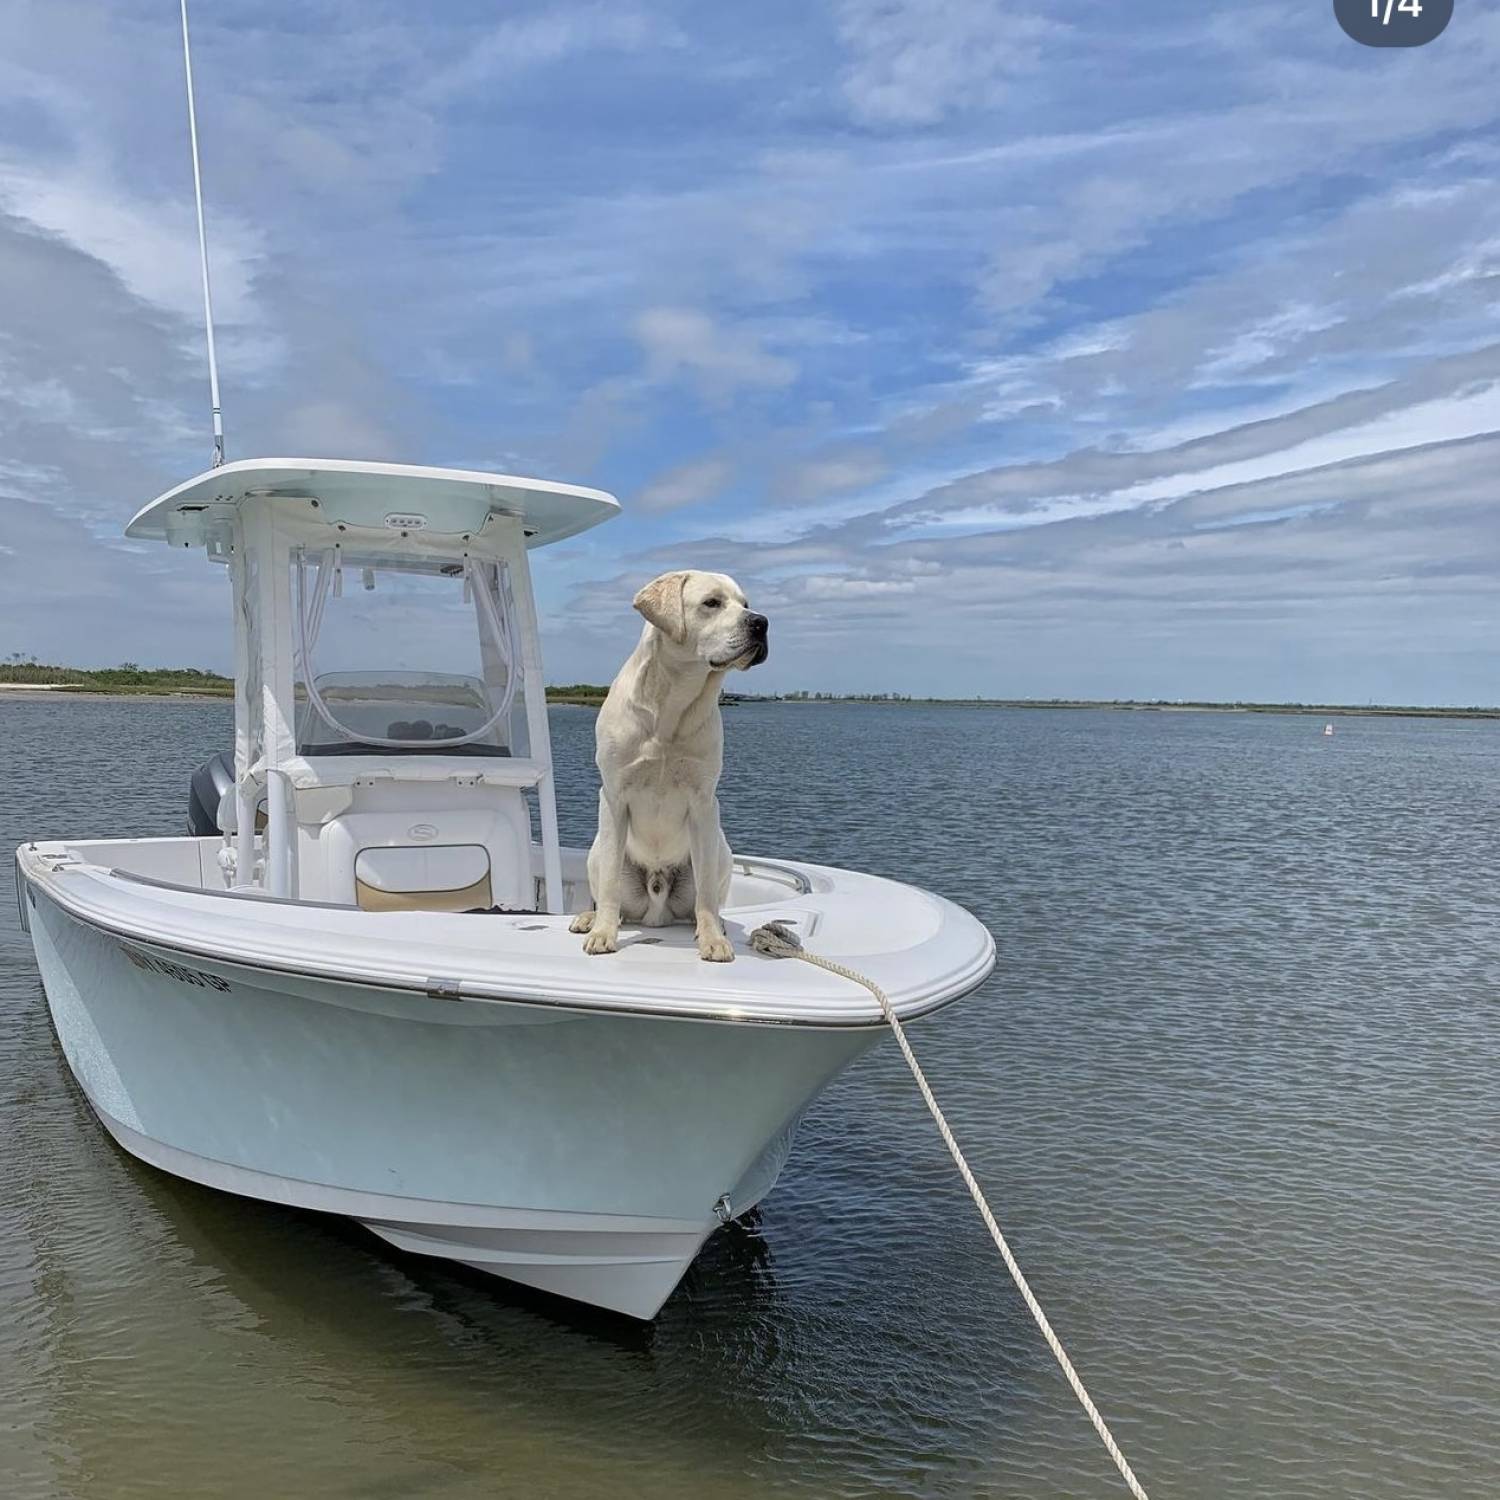 Our lab posing on the bow of our sportsman just outside the world famous Jones Beach Amphitheater